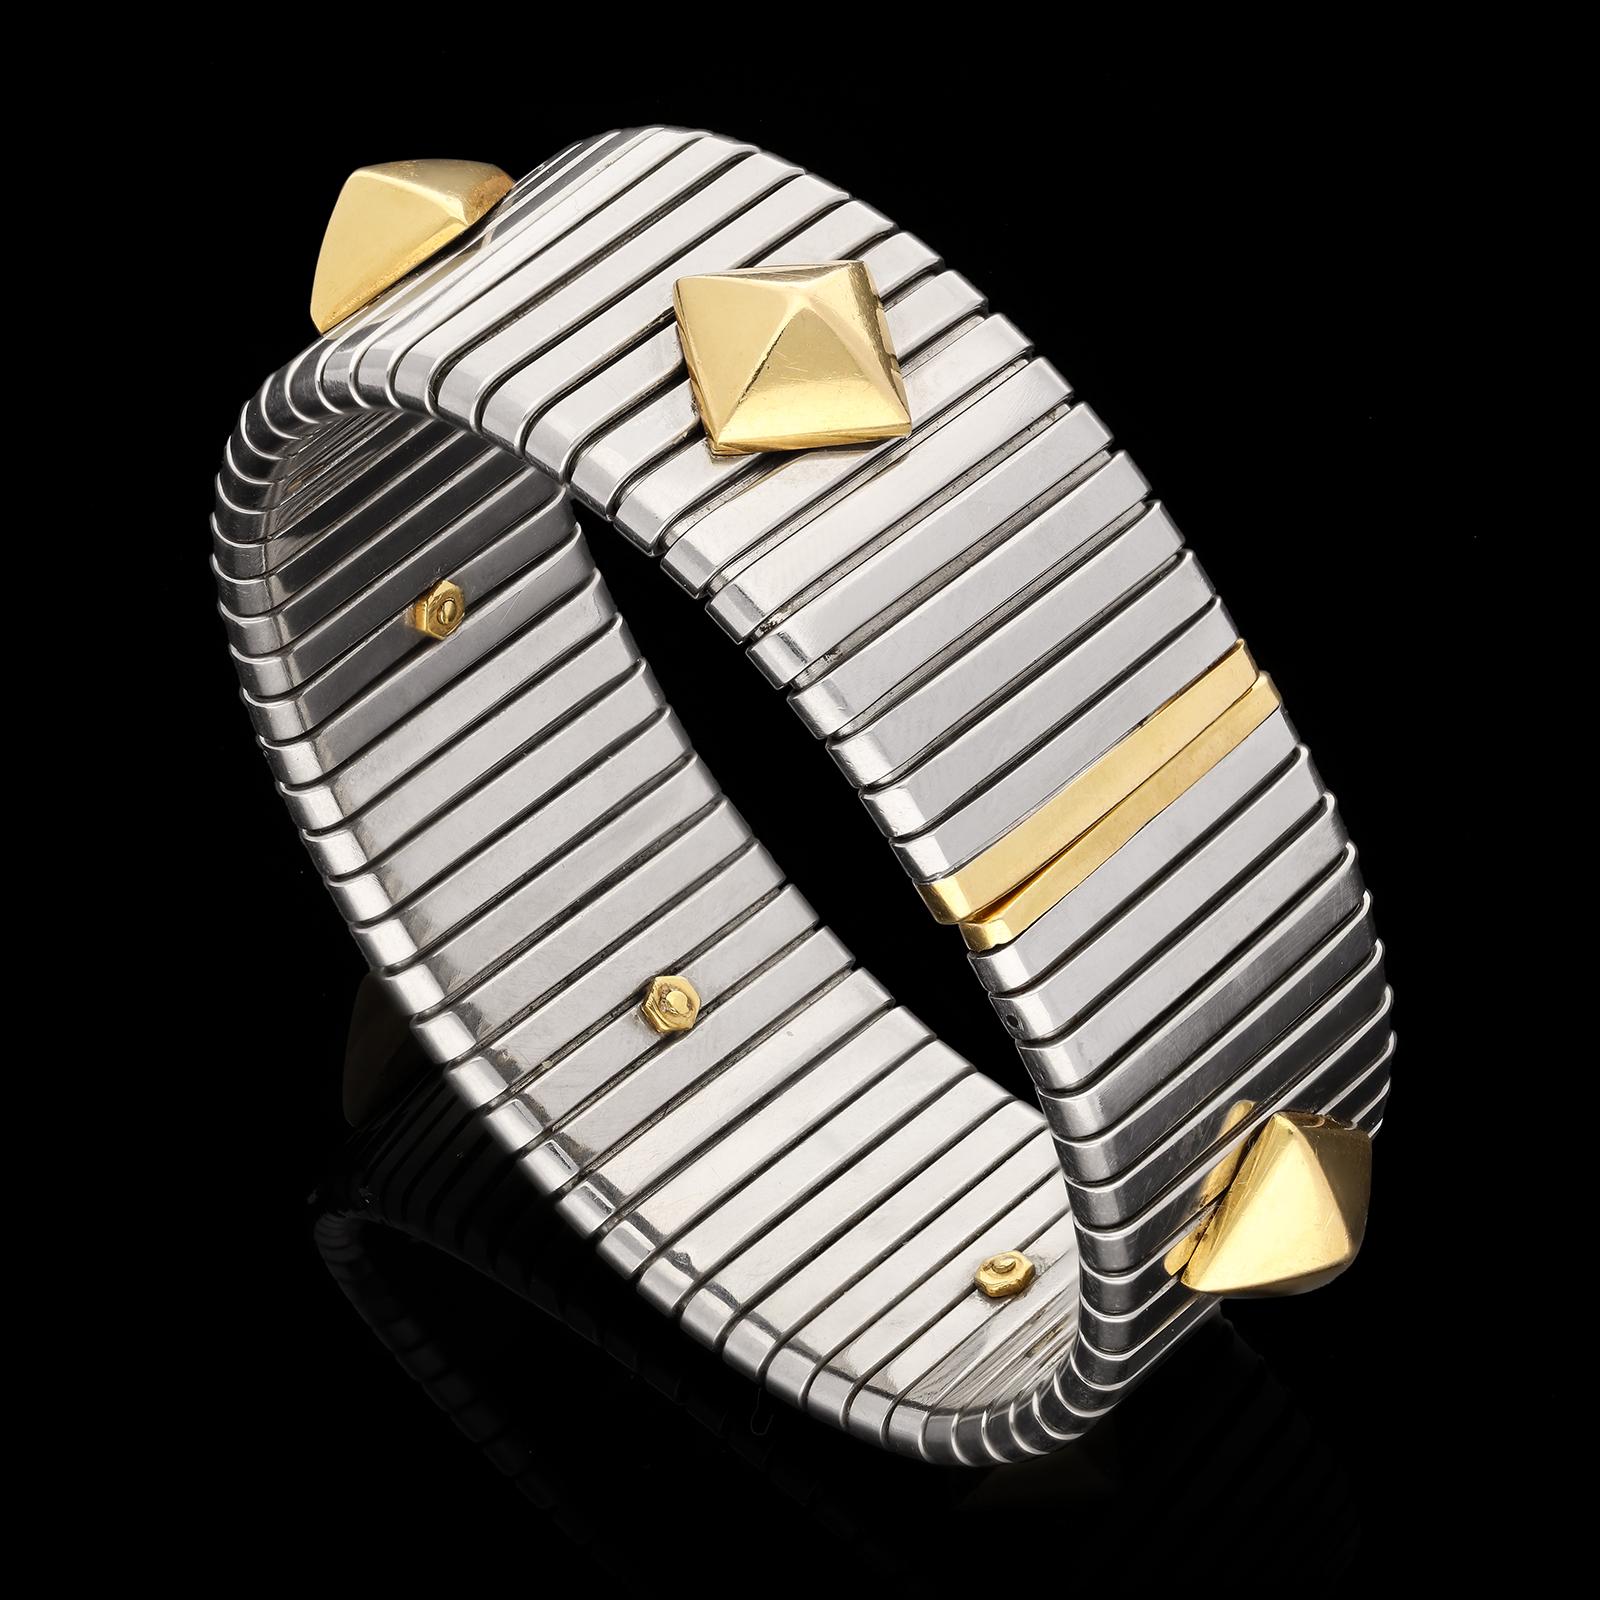 Description
A gold and steel Tubogas cuff bracelet by Bulgari c.1990s, the bracelet of flexible sprung design in stainless steel with straight edged opening to the centre back and with the iconic Tubogas slanted linear pattern, applied to the front